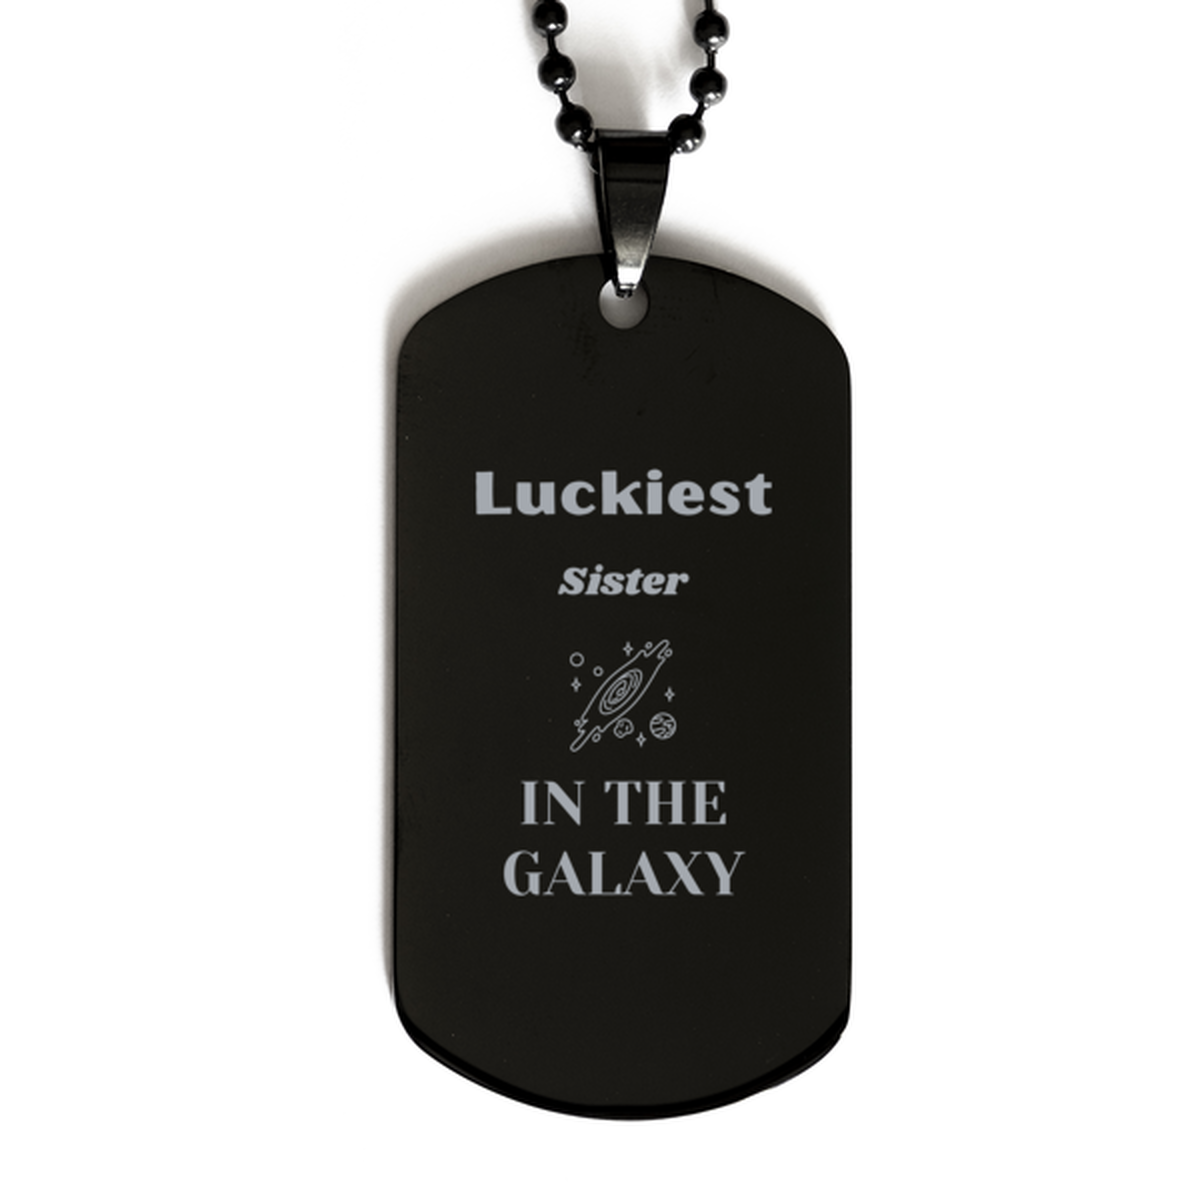 Luckiest Sister in the Galaxy, To My Sister Engraved Gifts, Christmas Sister Black Dog Tag Gifts, X-mas Birthday Unique Gifts For Sister Men Women